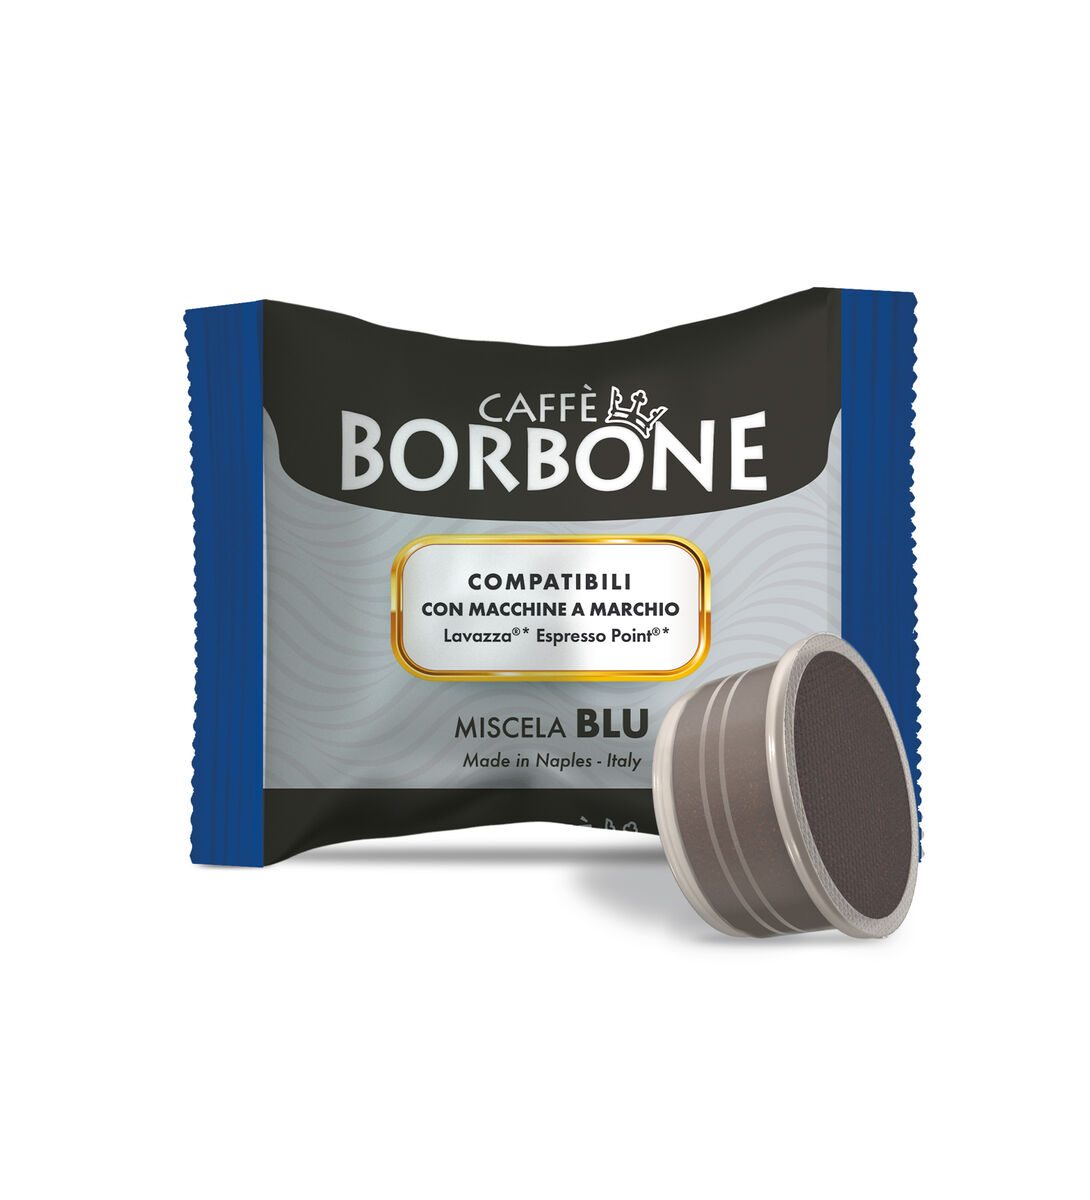 1000 Nespresso compatible Borbone REspresso capsules CHOICE between GOLD  and DEK